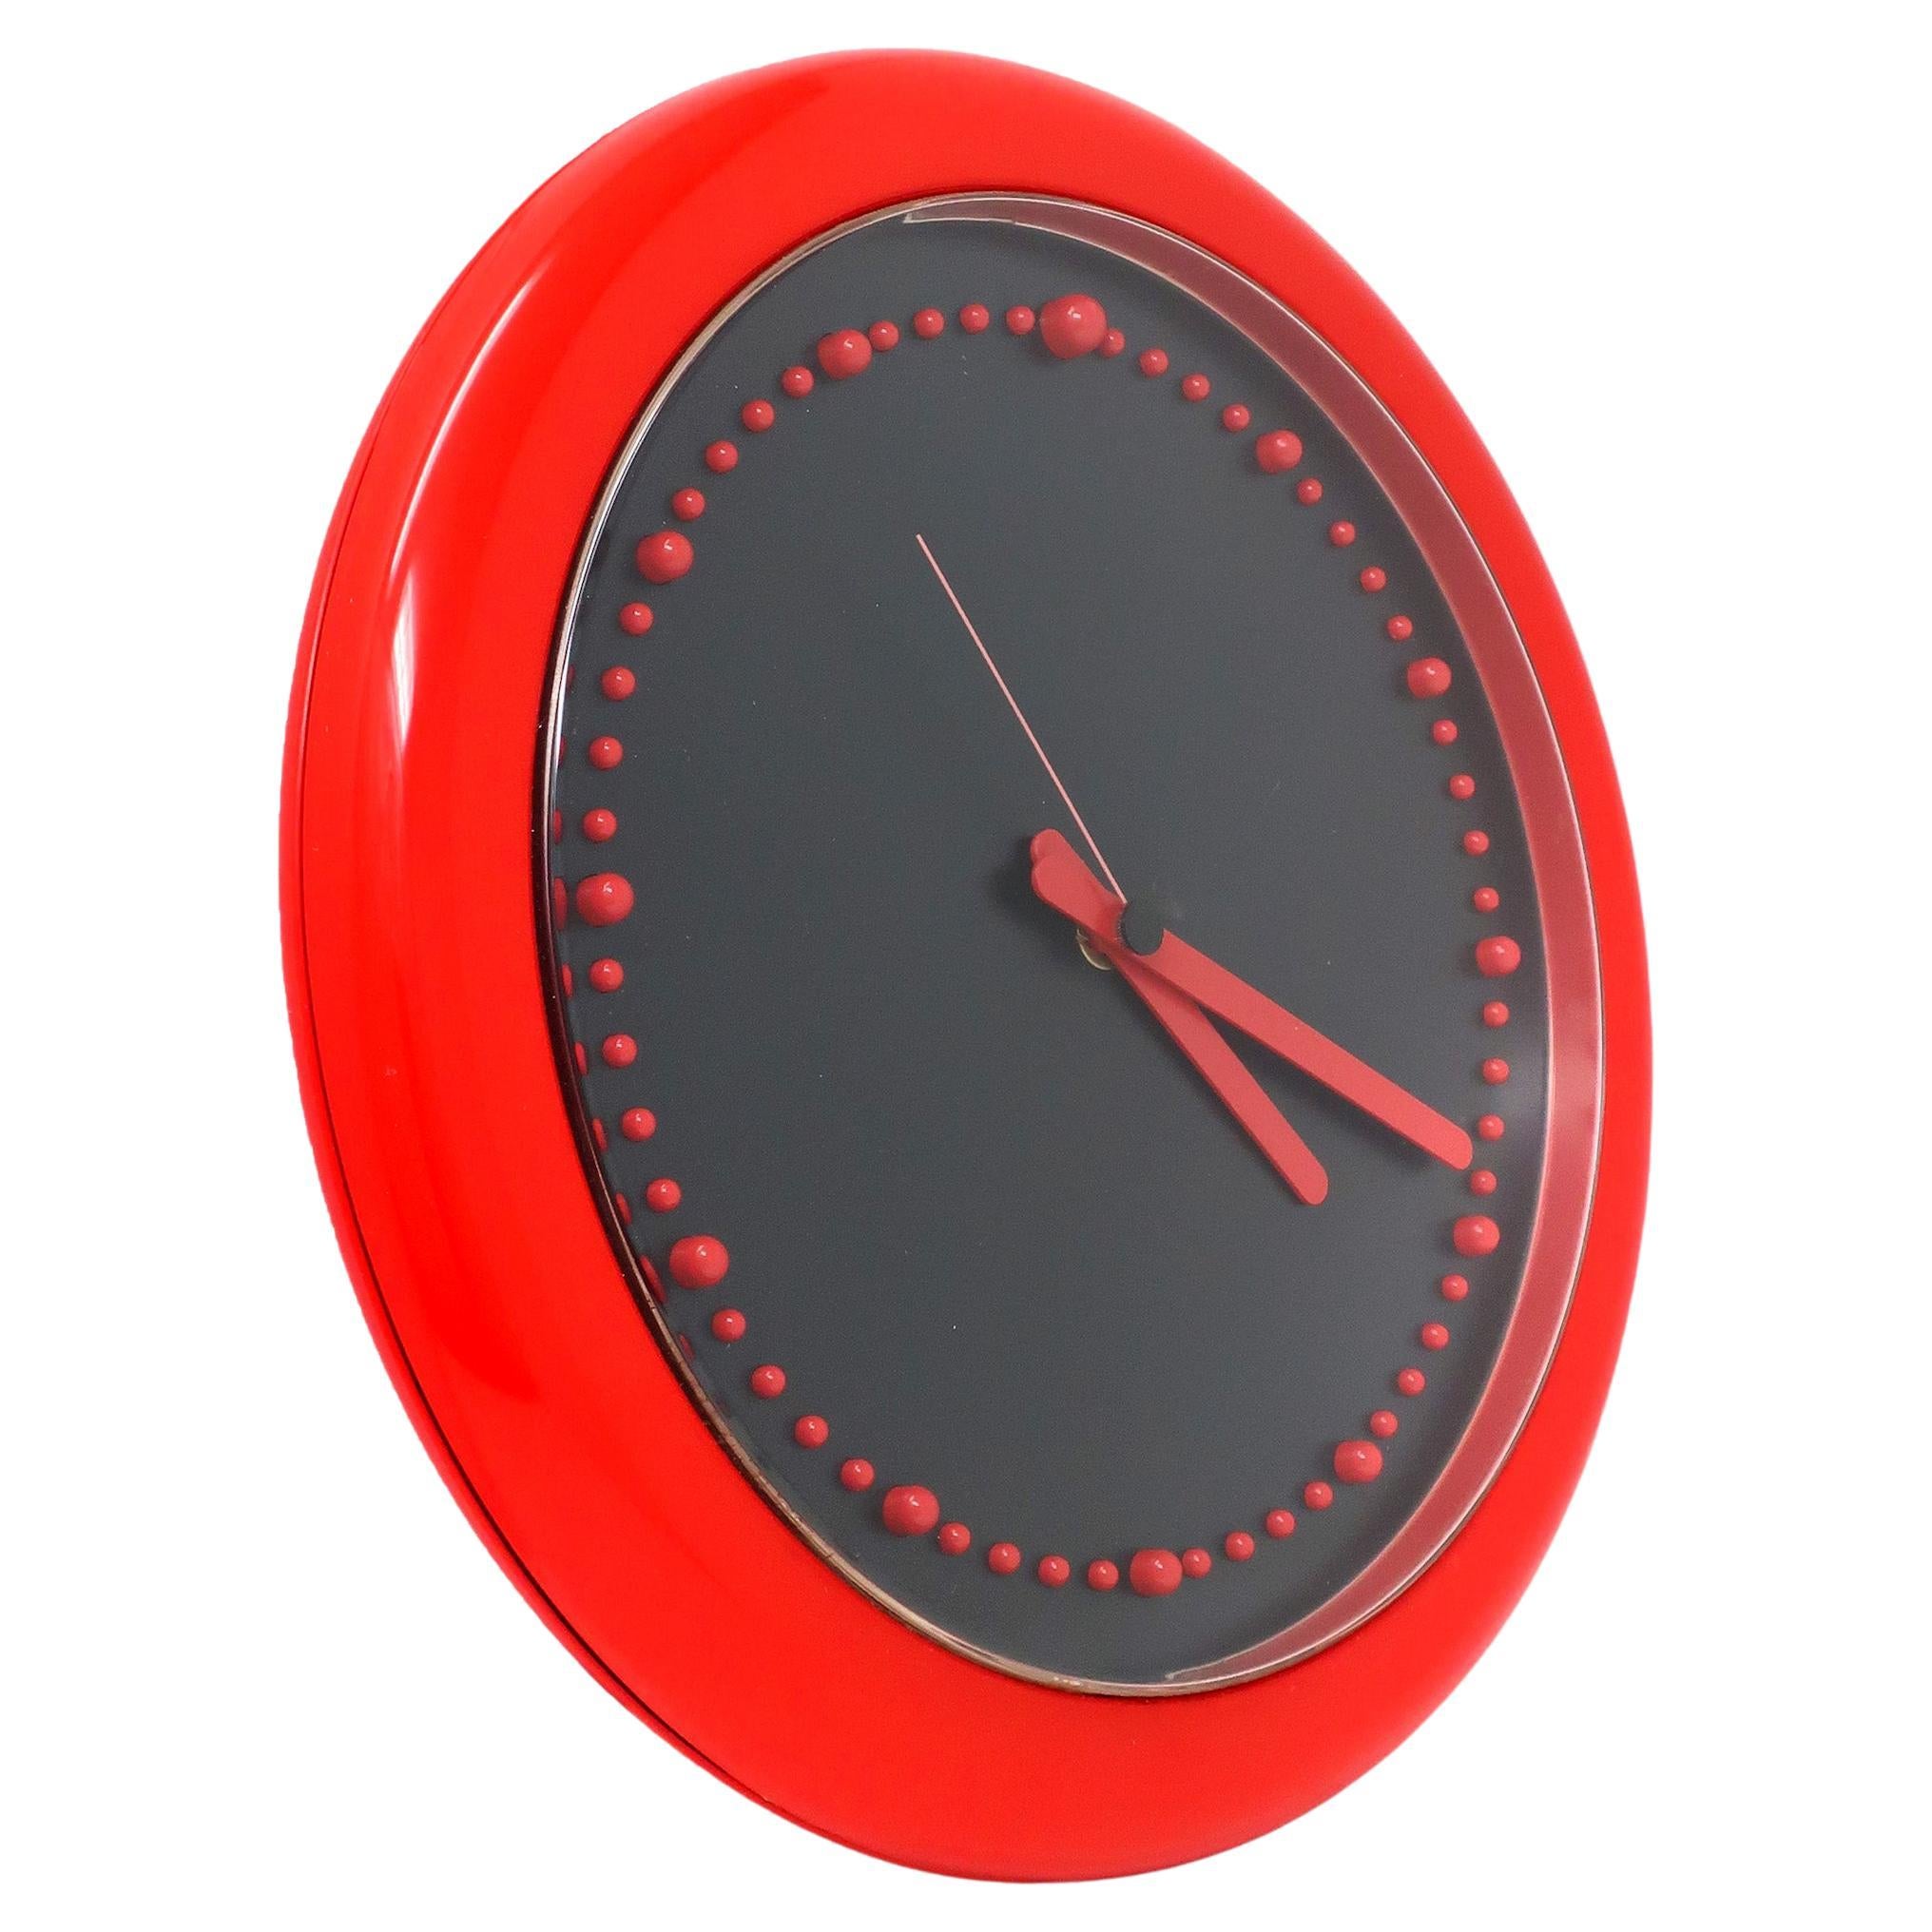 Designed by Raul Barbieri and Giorgio Marianelli for Rexite in 1981, this Zero 980 wall clock has a strikingly contrasting red and black color combination. Red plastic case, red hands, and raised red plastic bumps for the clock's numbers. Perfect